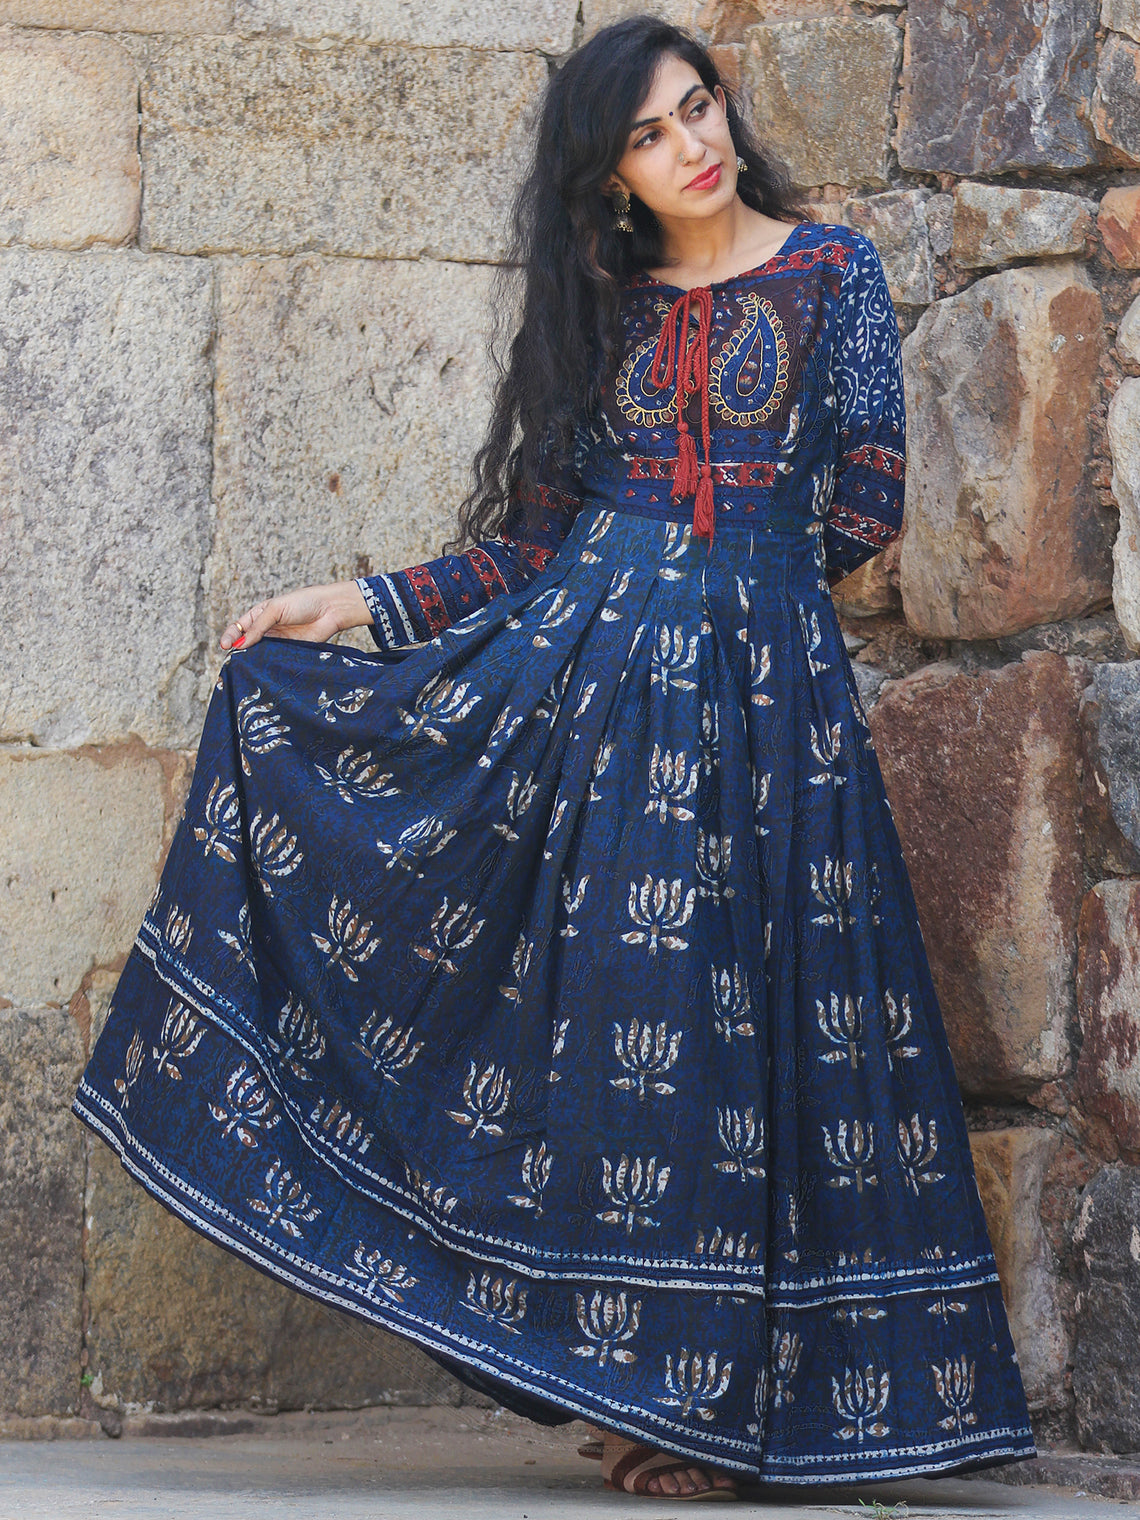 Naaz Lotus Mystique - Hand Block Printed Embroidered Long Cotton Pleat ...